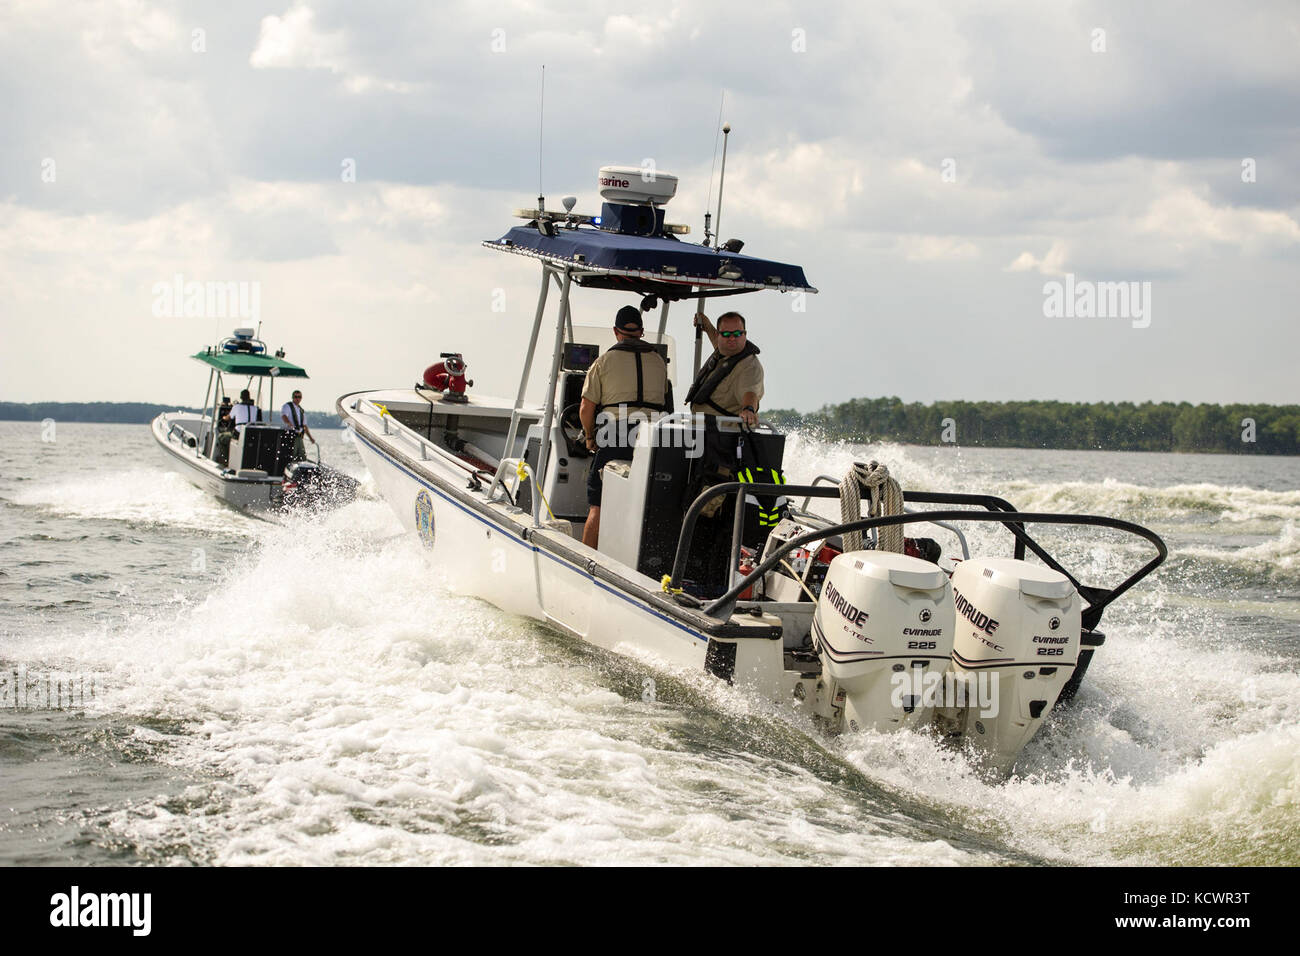 A memorial procession was held on Lake Murray, S.C., to honor U.S. Army Sgts. First Class Charles Judge, Jr., and Jonathon Prins, July 29, 2016.  The two Soldiers were killed while attempting to protect a woman who was allegedly being attacked by a gunman. The boat procession was a way to celebrate their lives.  (U.S. Air National Guard photo by Tech. Sgt. Jorge Intriago) Stock Photo